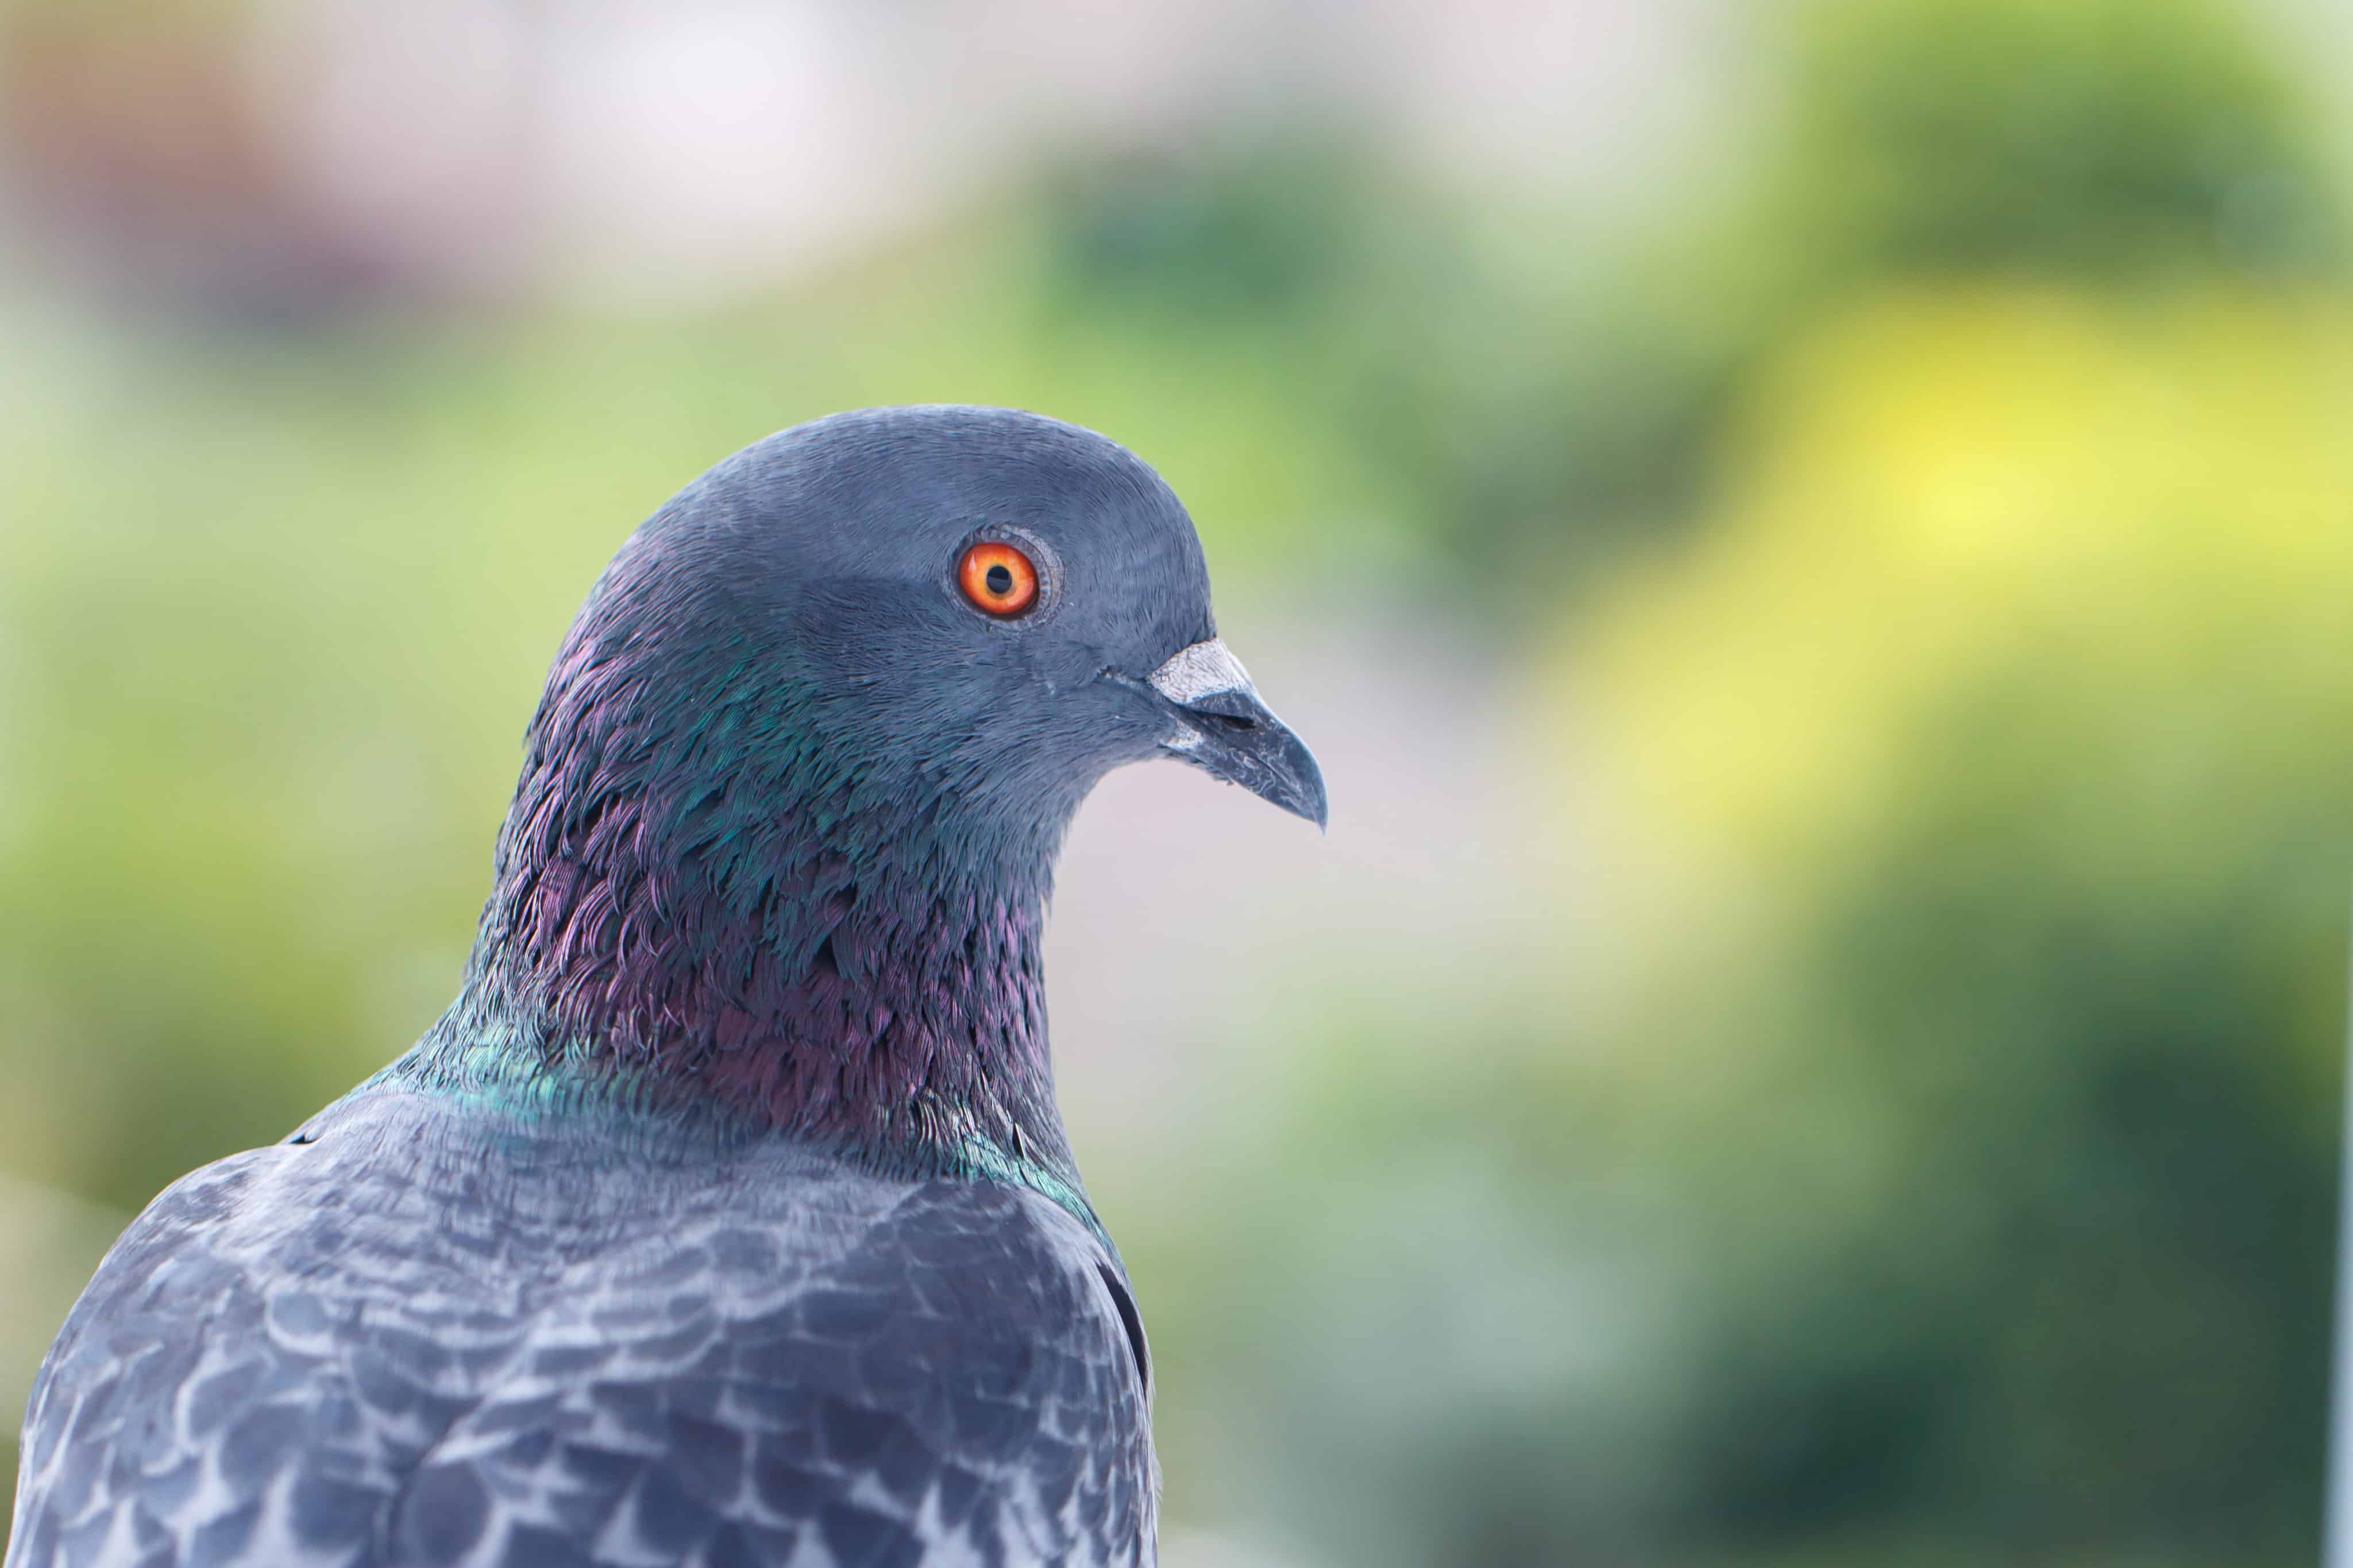 Drug-Carrying Pigeon in Canadian Prison Yard